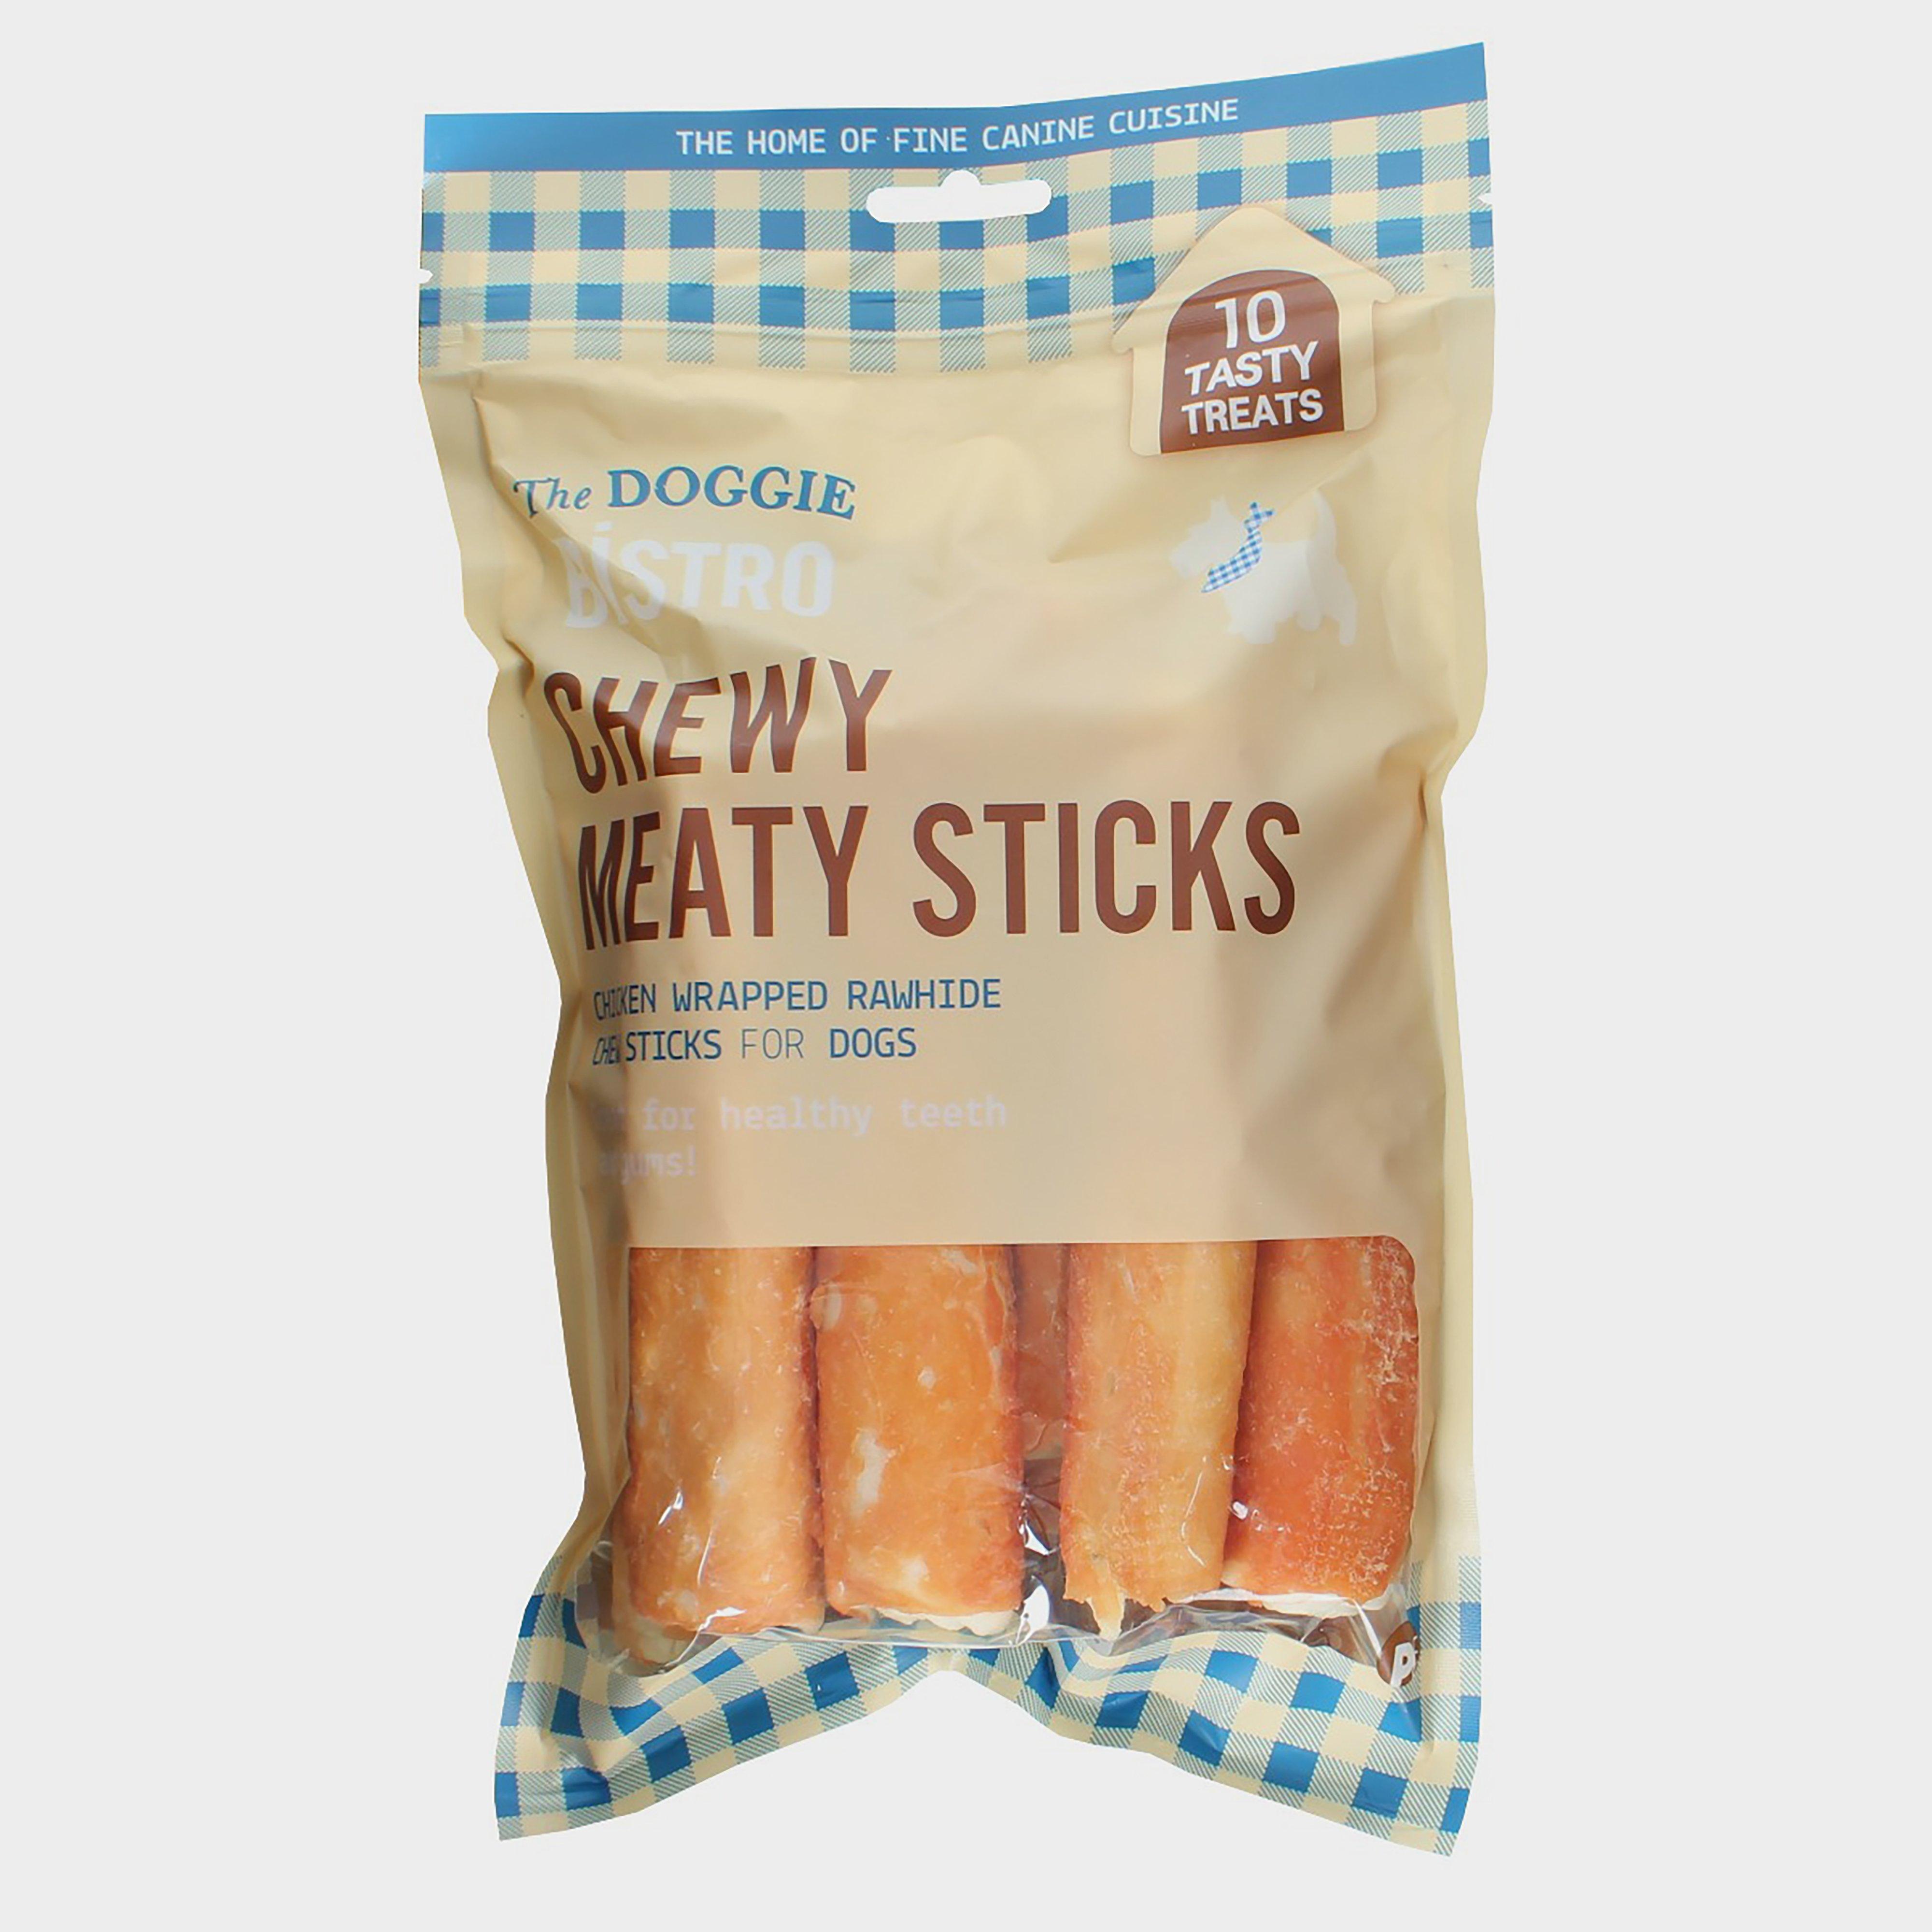 Image of Petface Doggie Bistro Chewy Meaty Sticks 10 Pack - Sticks/Sticks, STICKS/STICKS